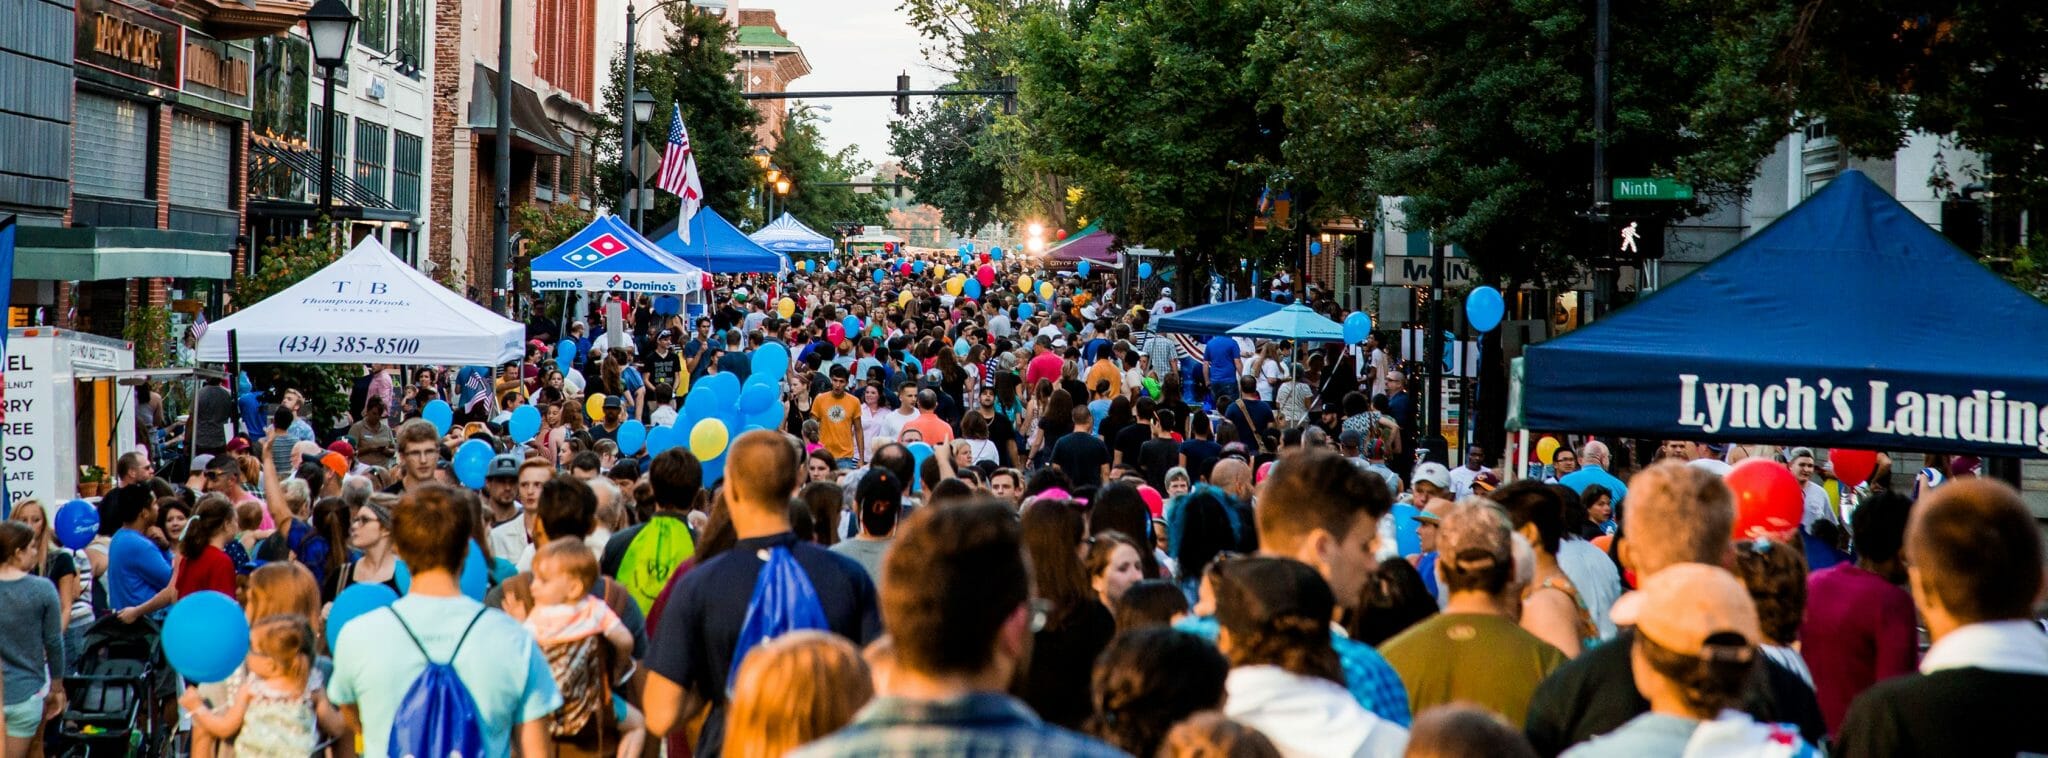 Your LYH Guide to Fall Festivals and Events LYH Lynchburg Tourism